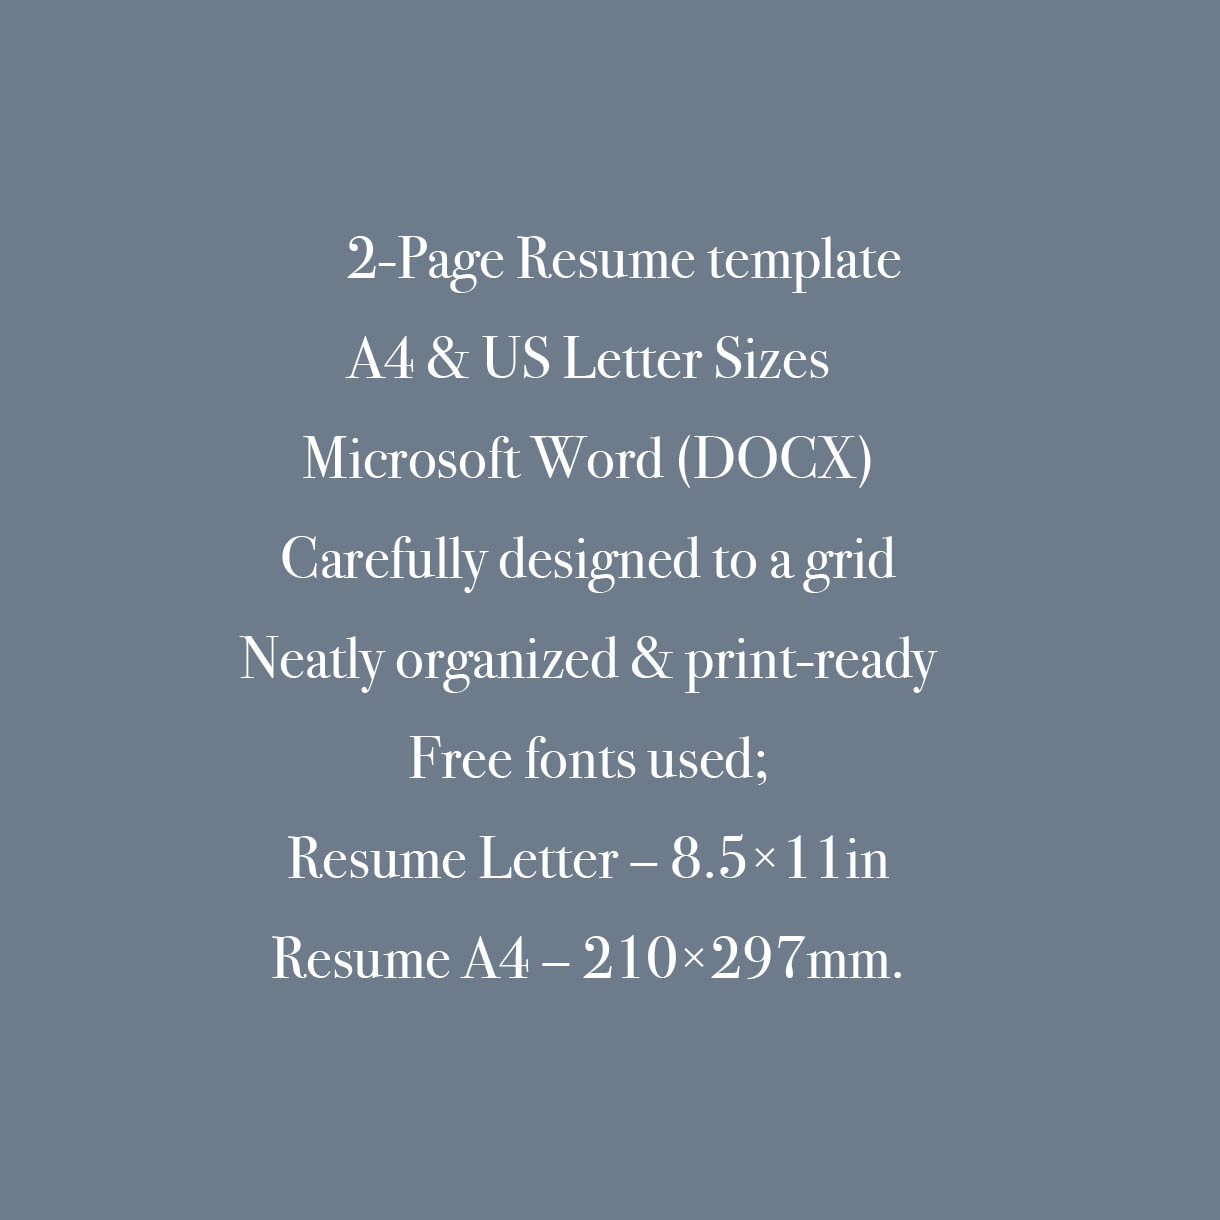 Apartment Rental Resume Template CV preview Image.